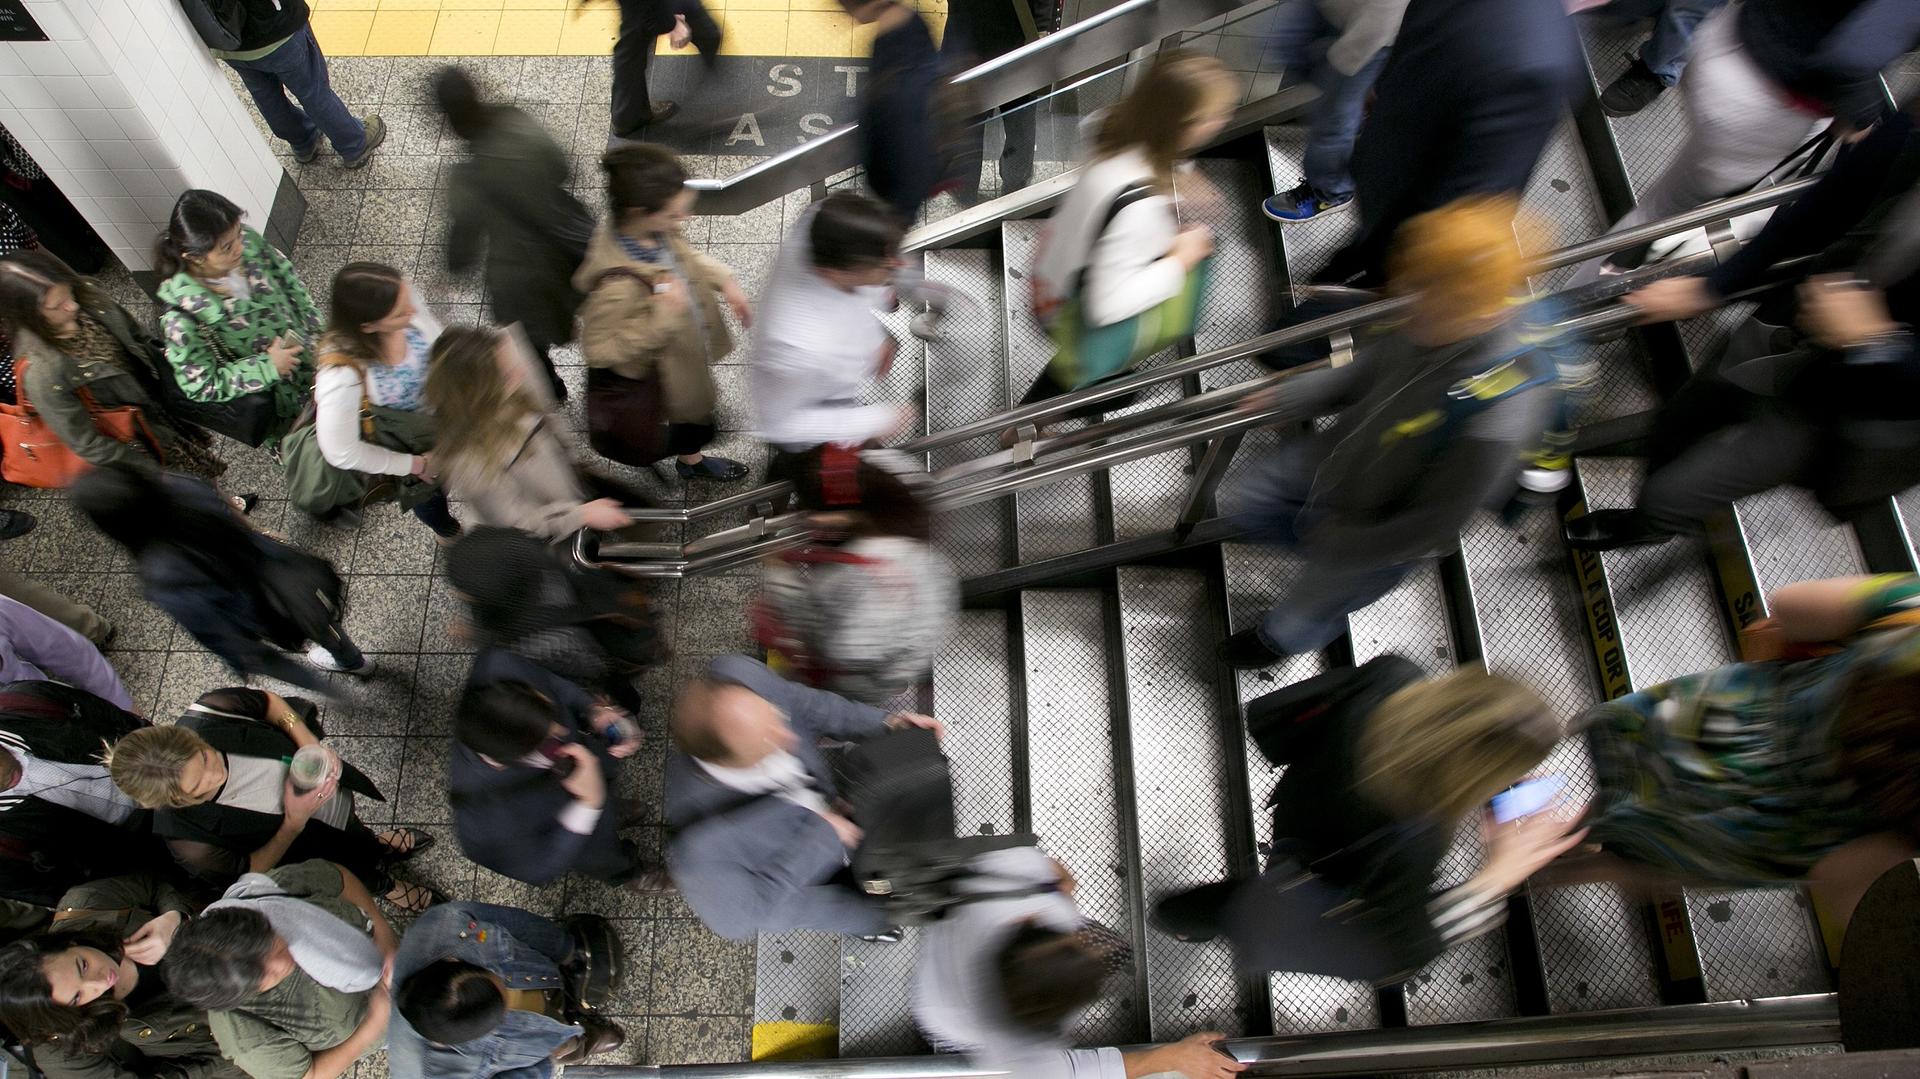 A crowd of people rushing in a subway station